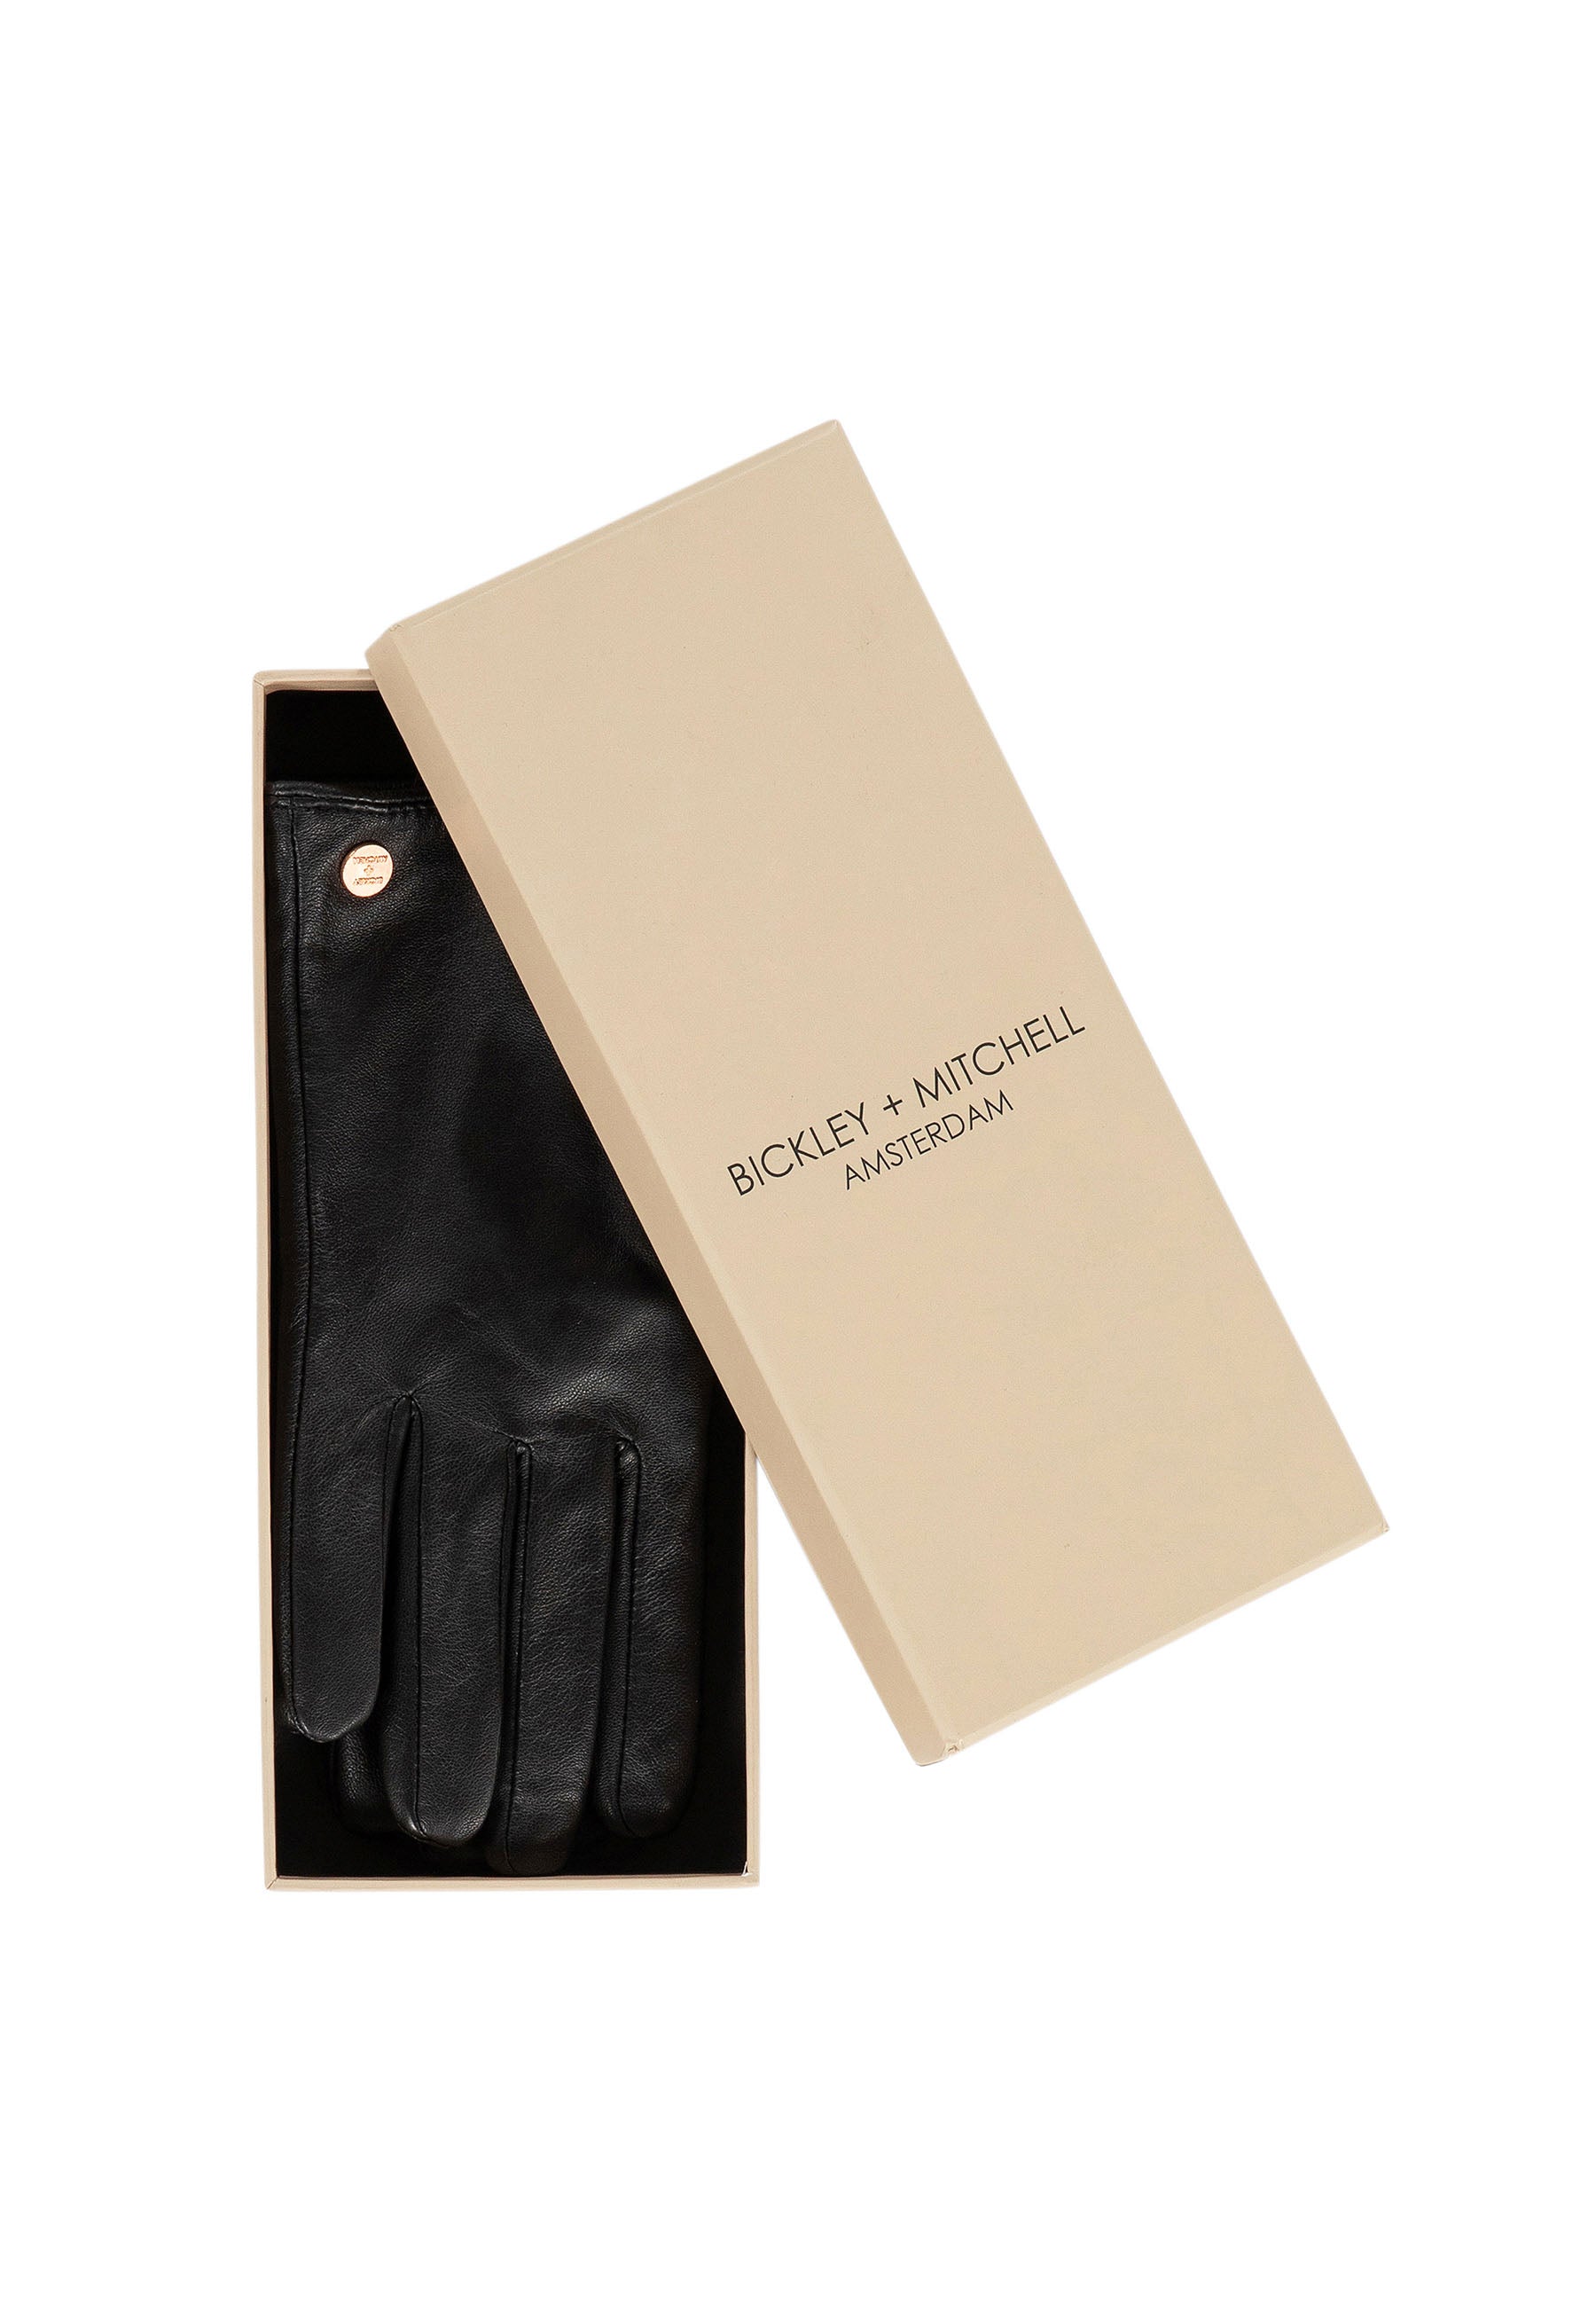 GIFTBOX | Leather Gloves